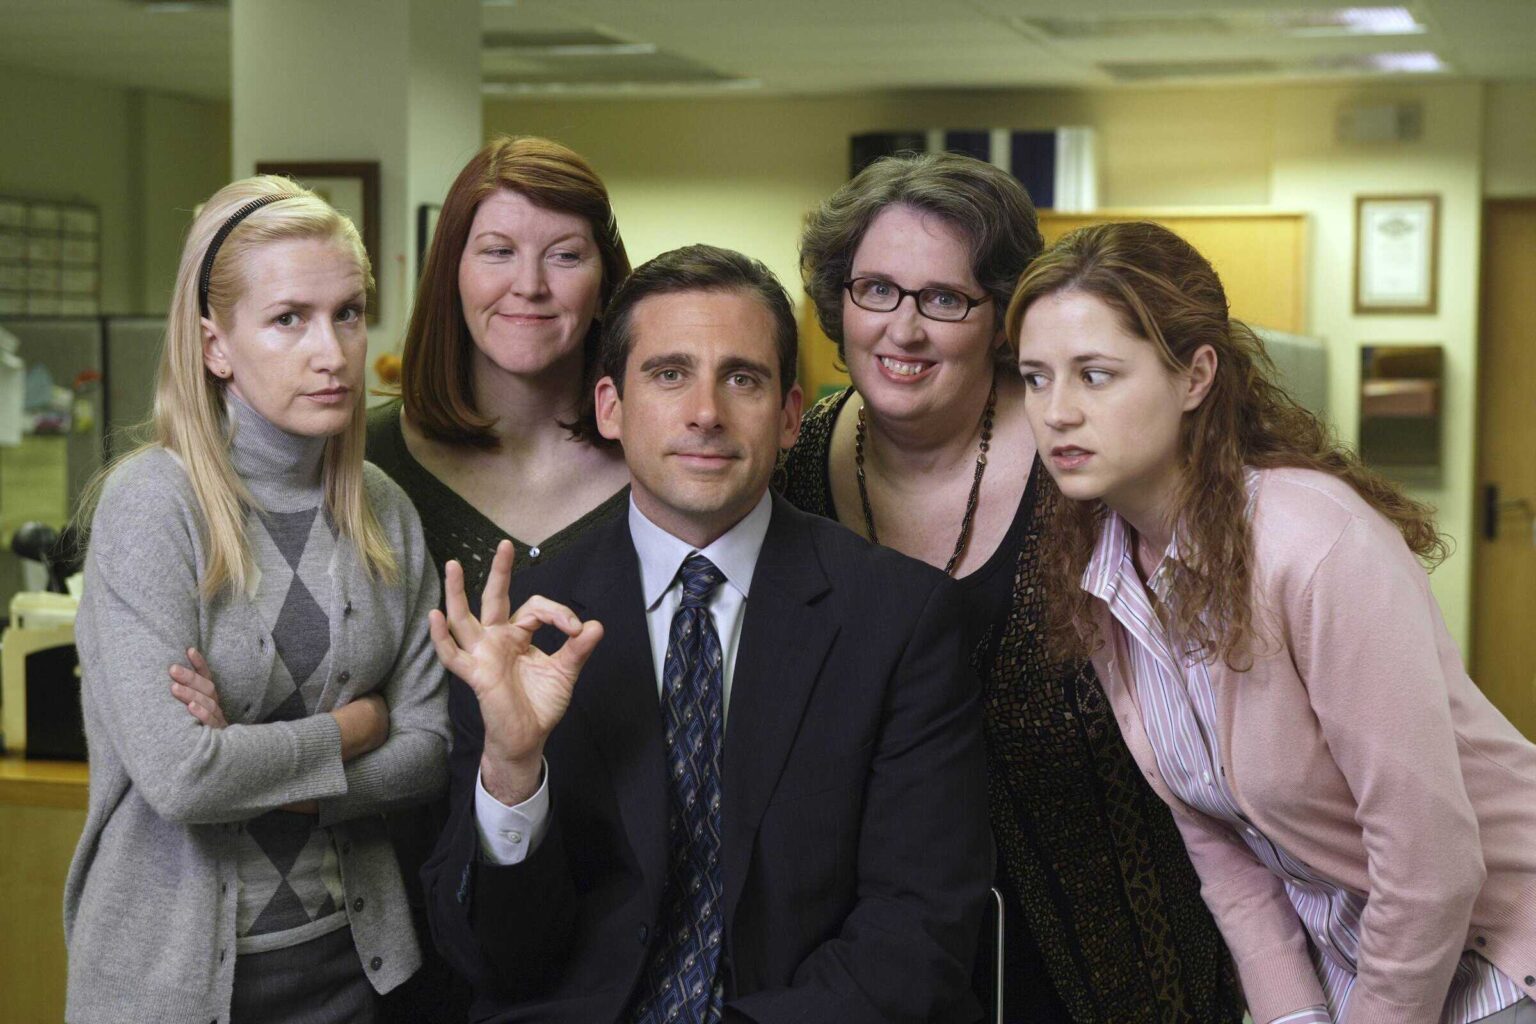 'The Office' & 'Parks and Recreation' are so dang quotable we made a quiz to test your devotion to these legendary workplace comedies. Enjoy!